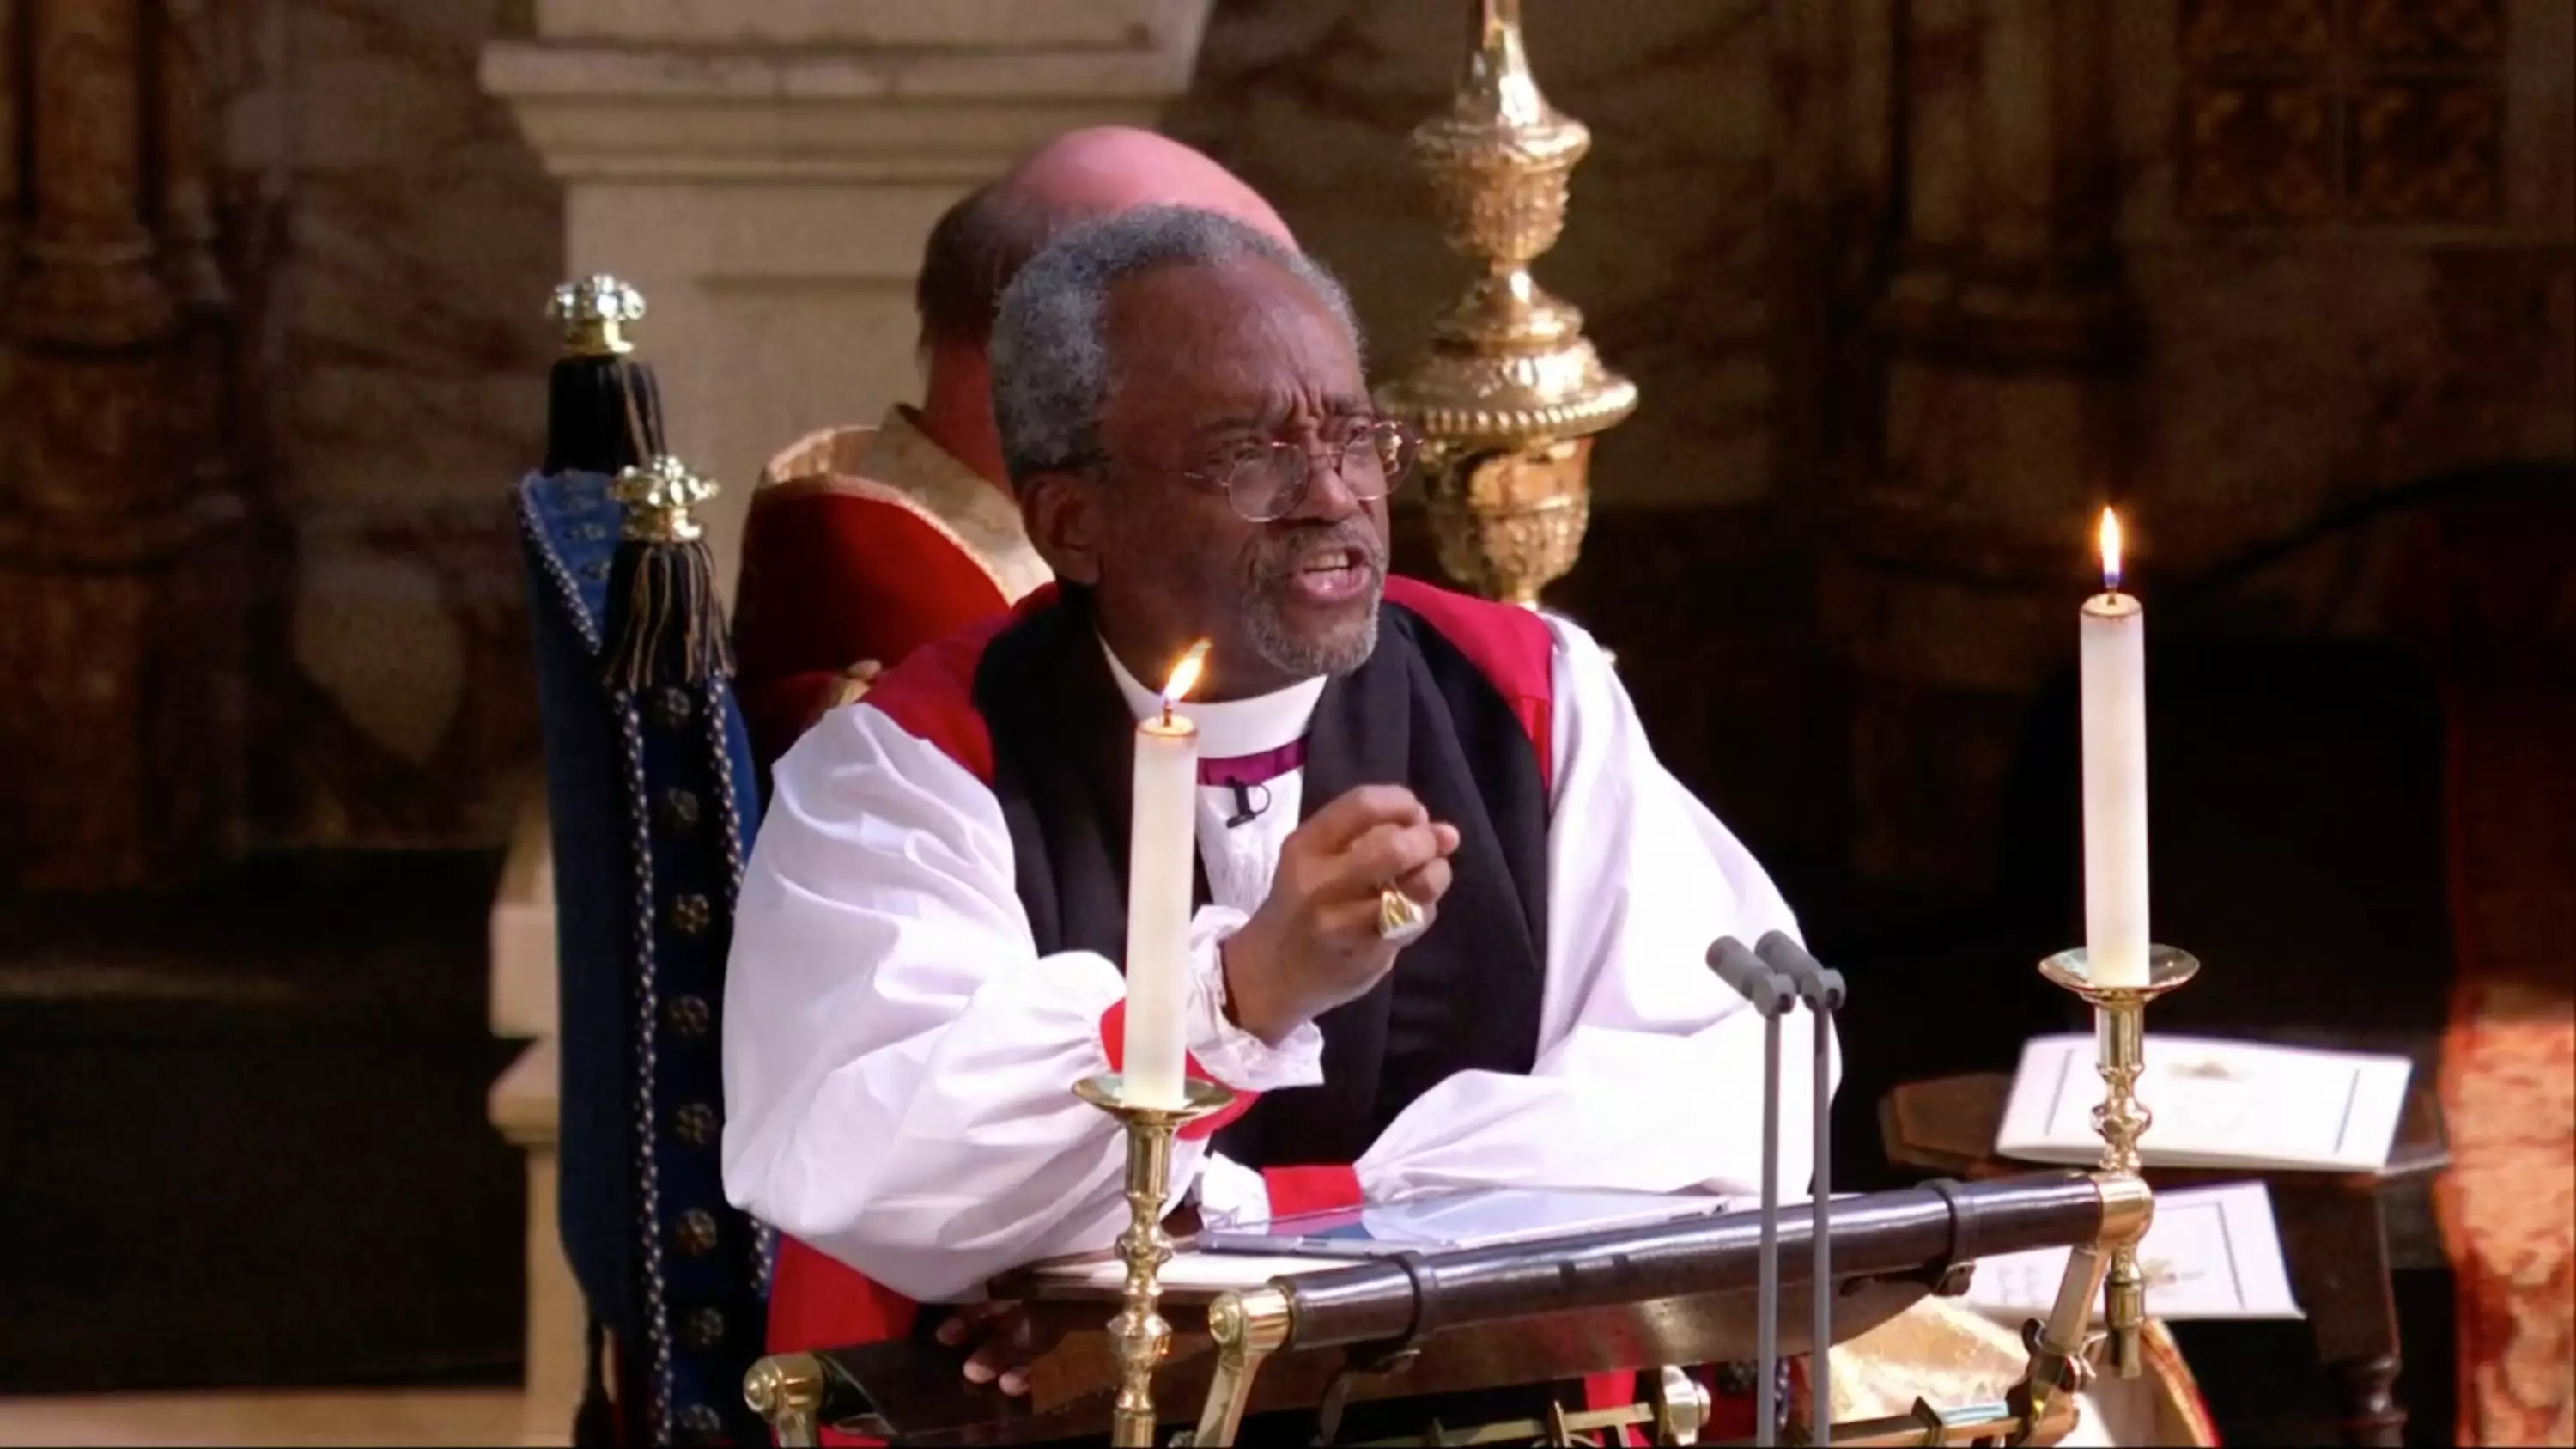 Royal Wedding 2018: The Reactions To Bishop Michael Curry’s Show Stealing Service Are Priceless